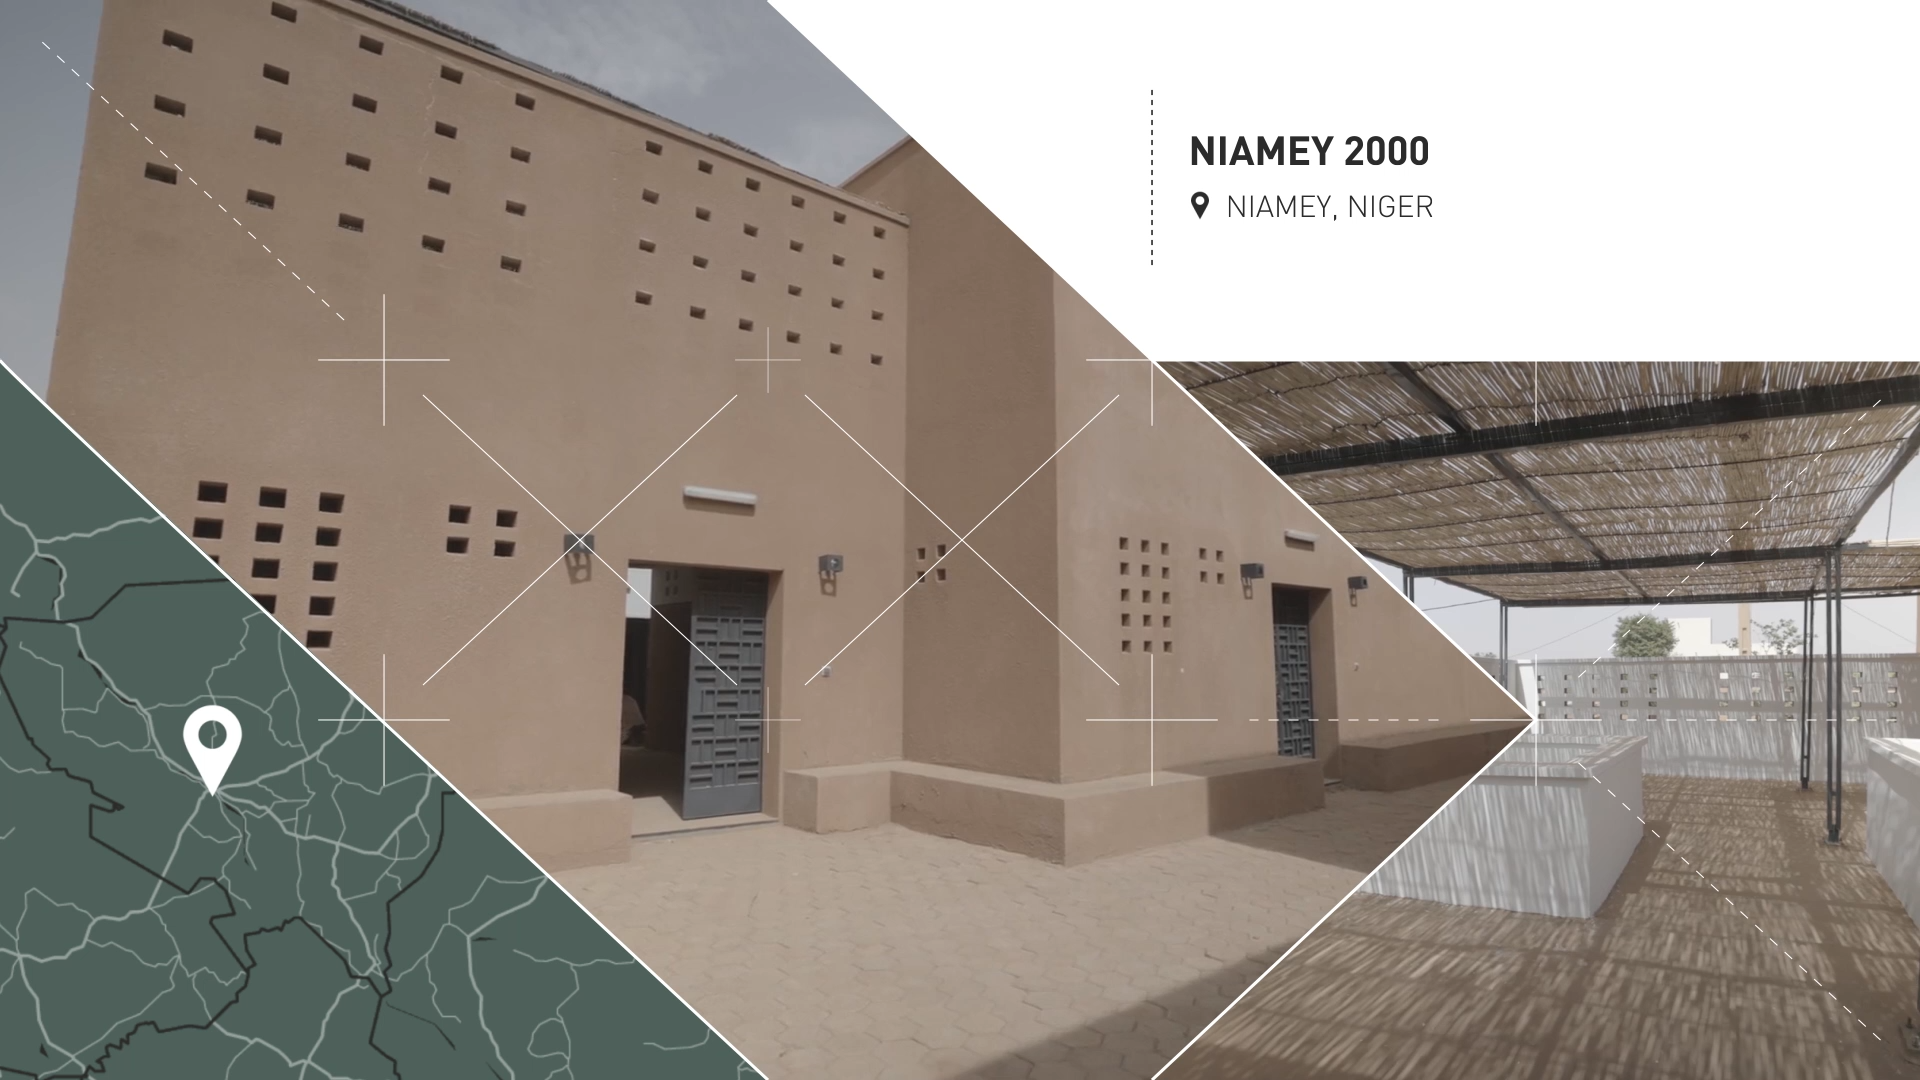 <p>Niamey 2000,&nbsp;Niamey, Niger, by united4design / Yasaman Esmaili, Elizabeth Golden, Mariam Kamara, Philip Straeter: As a response to a housing shortage amid rapid urban expansion, this prototype housing of six family units seeks to increase density while remaining culturally appropriate.</p>